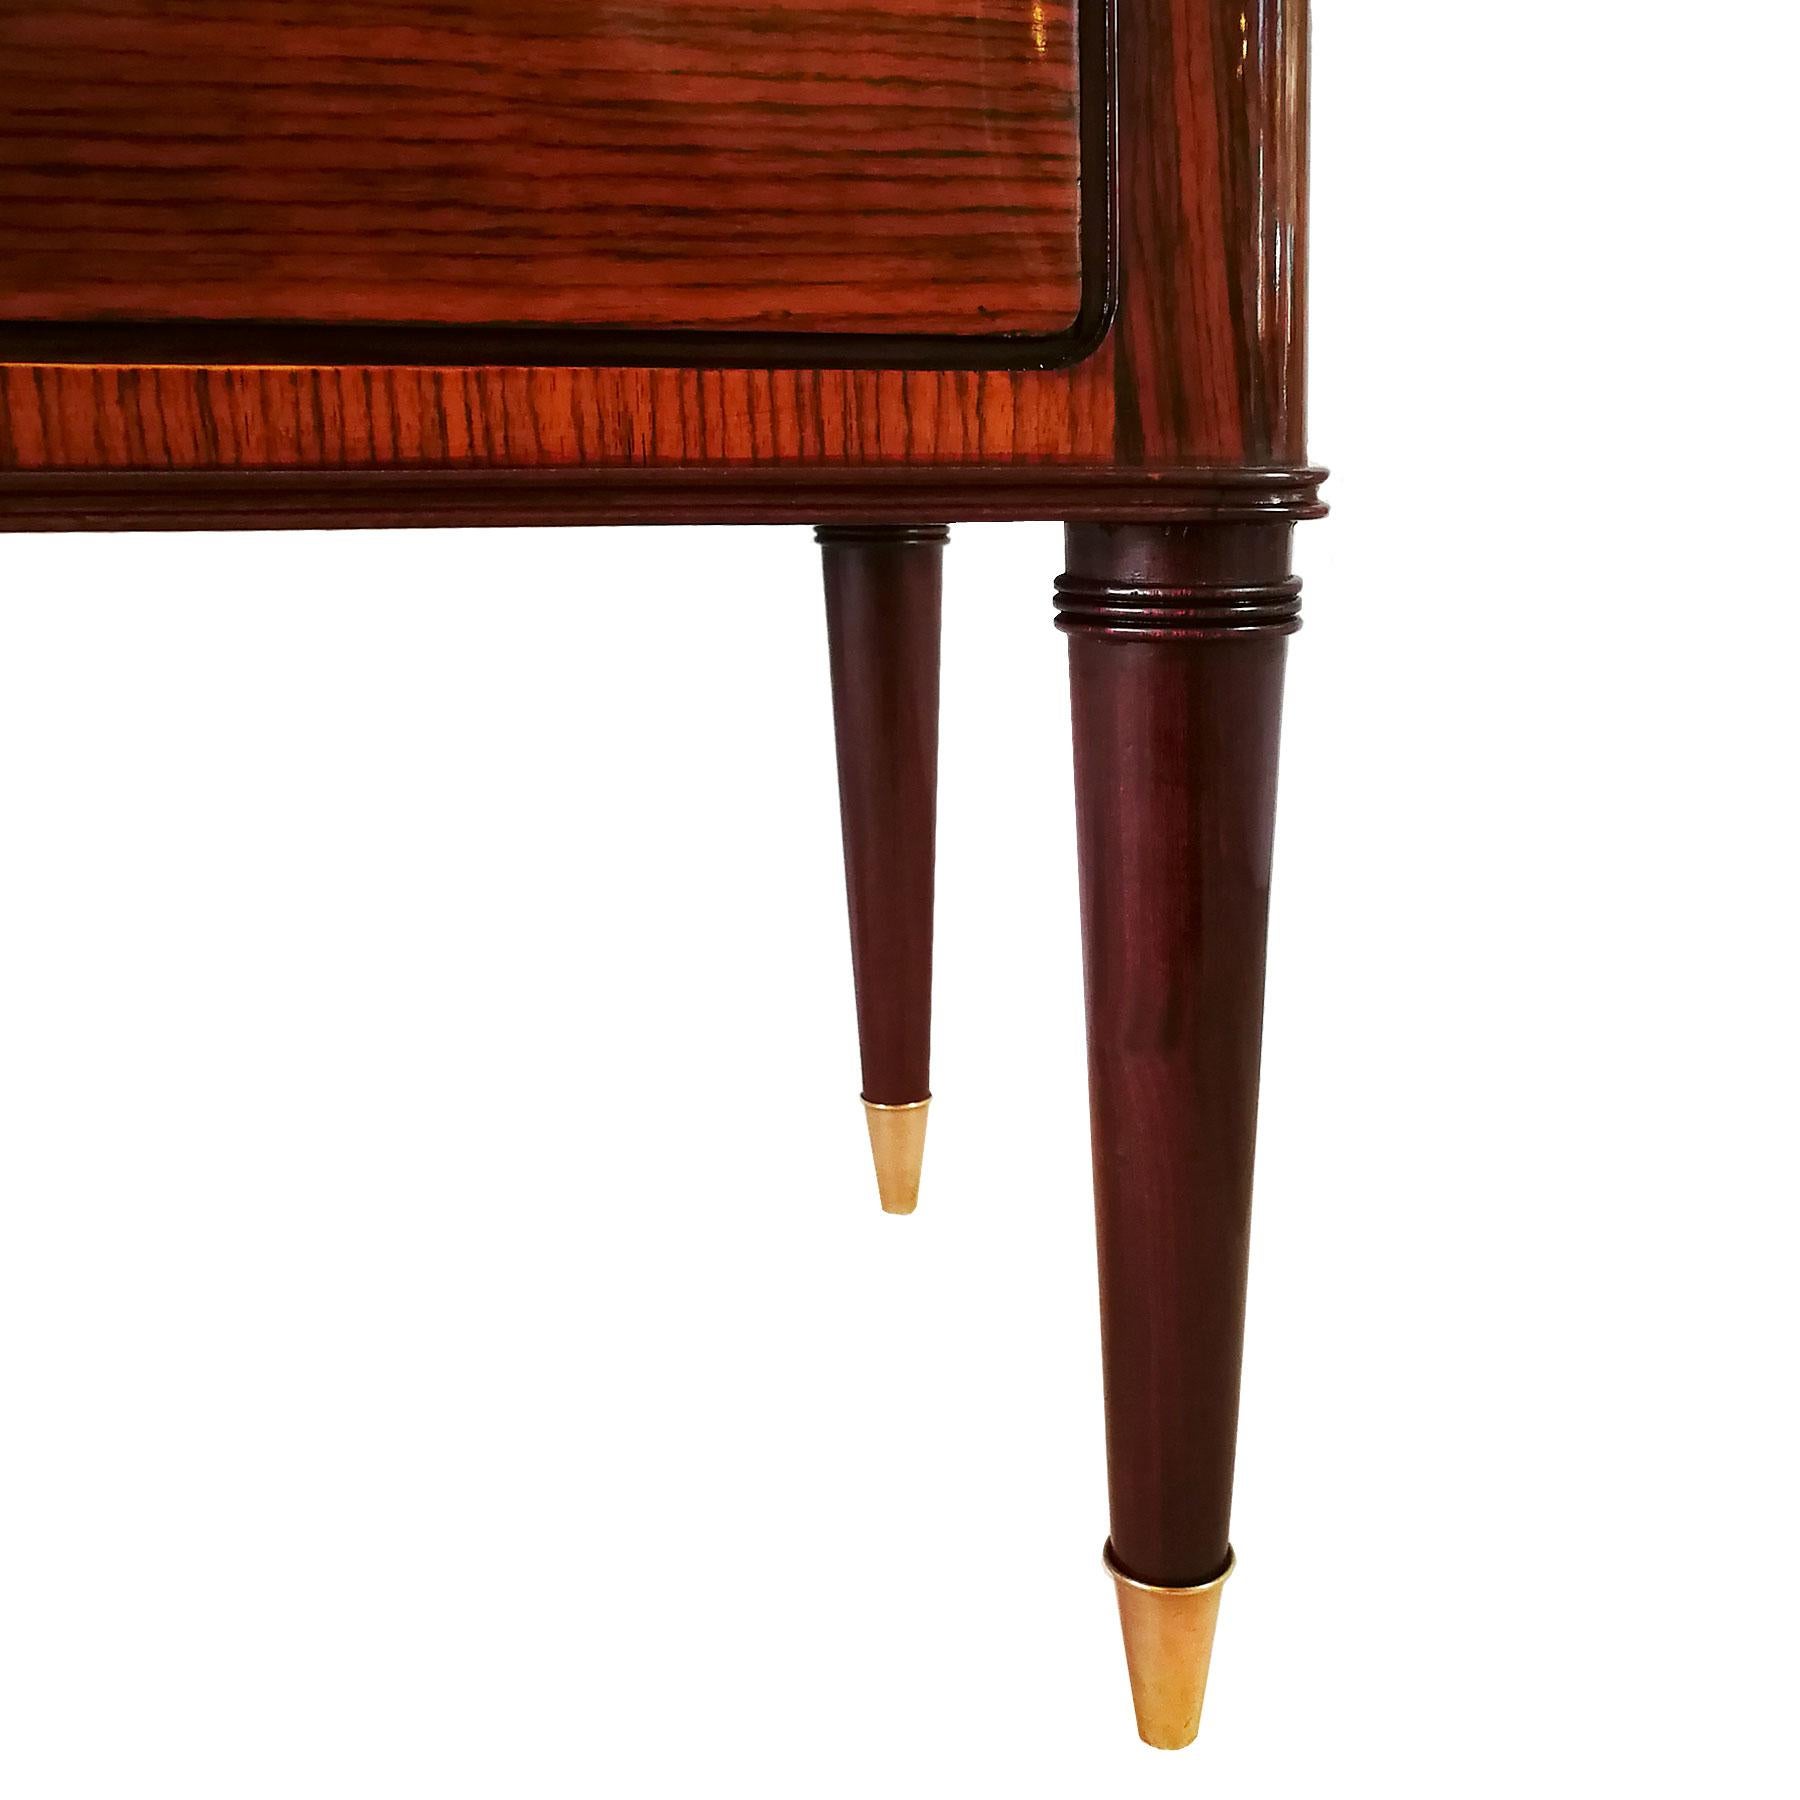 Italian Large Mid-Century Modern Commode in Zebra Wood, Mahogany and Brass - Italy For Sale